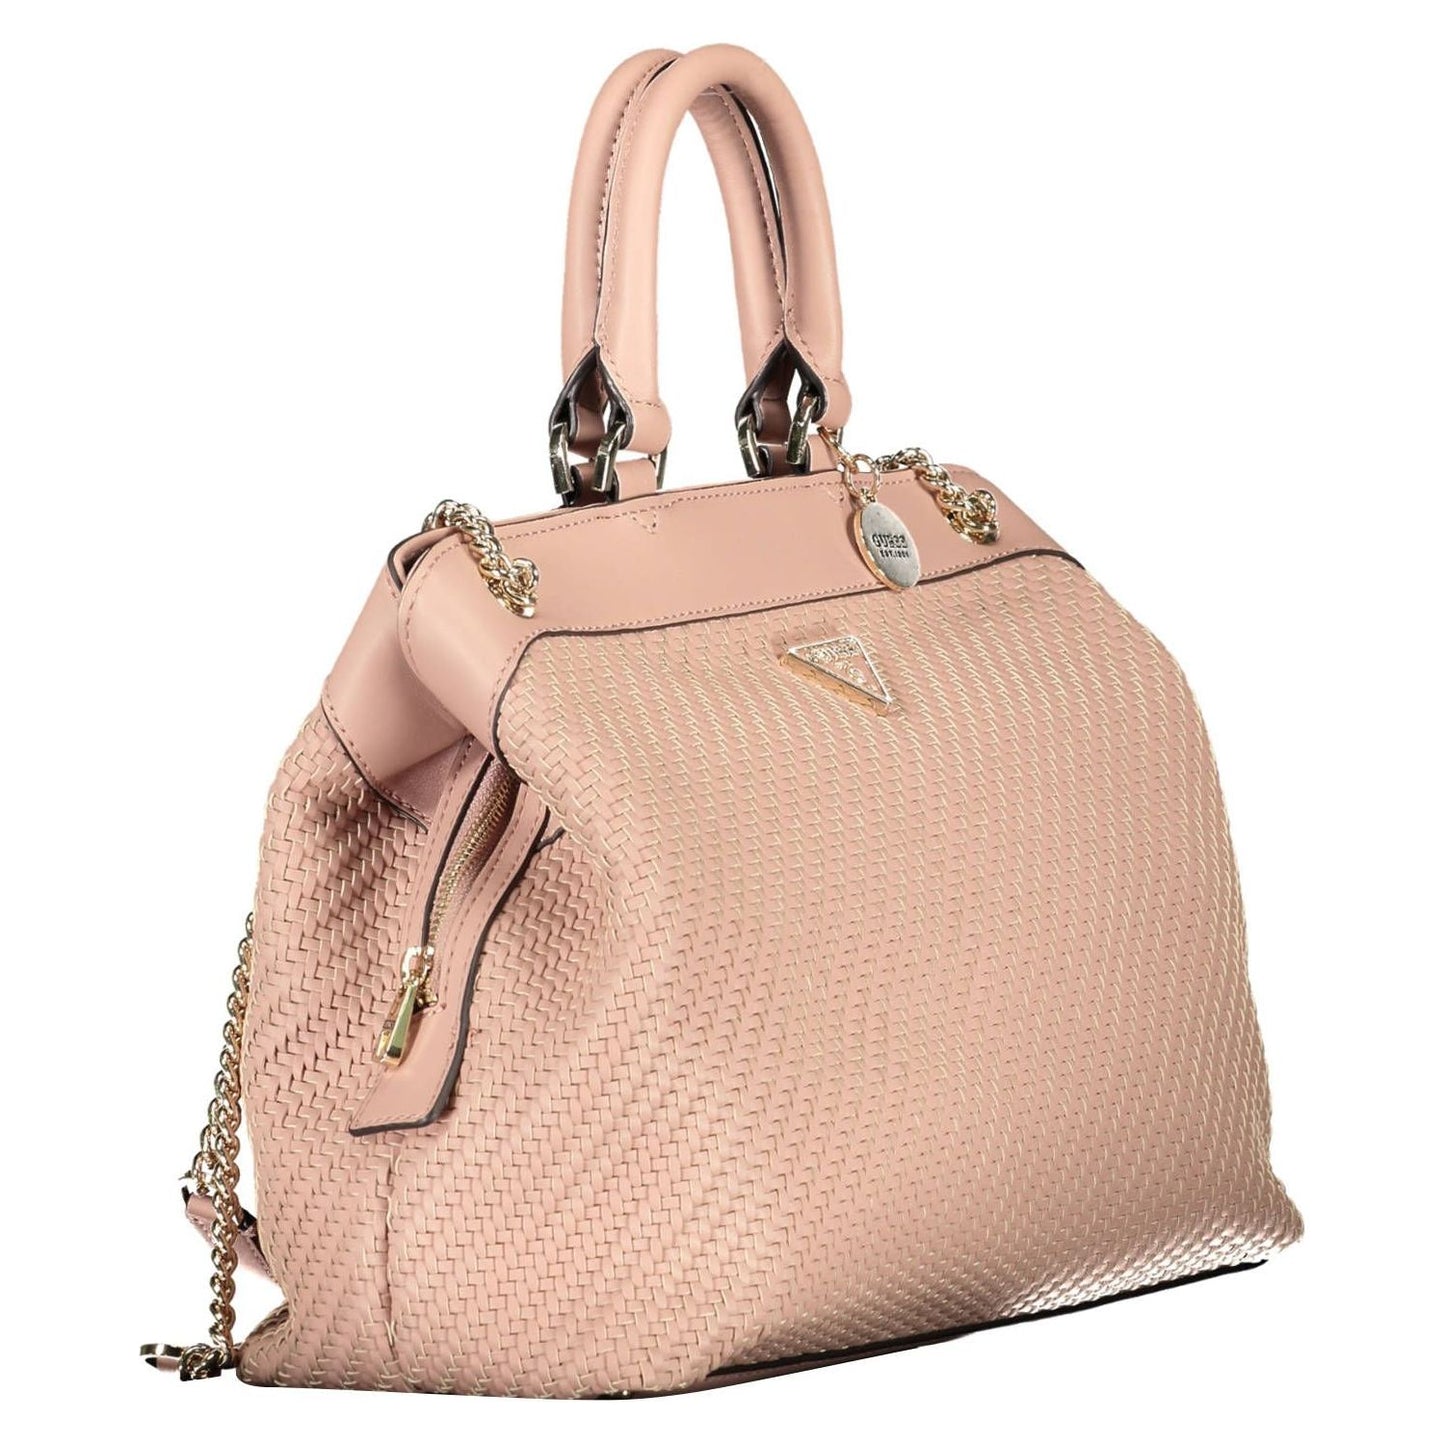 Guess Jeans Chic Pink Chain-Handle Shoulder Bag chic-pink-chain-handle-shoulder-bag